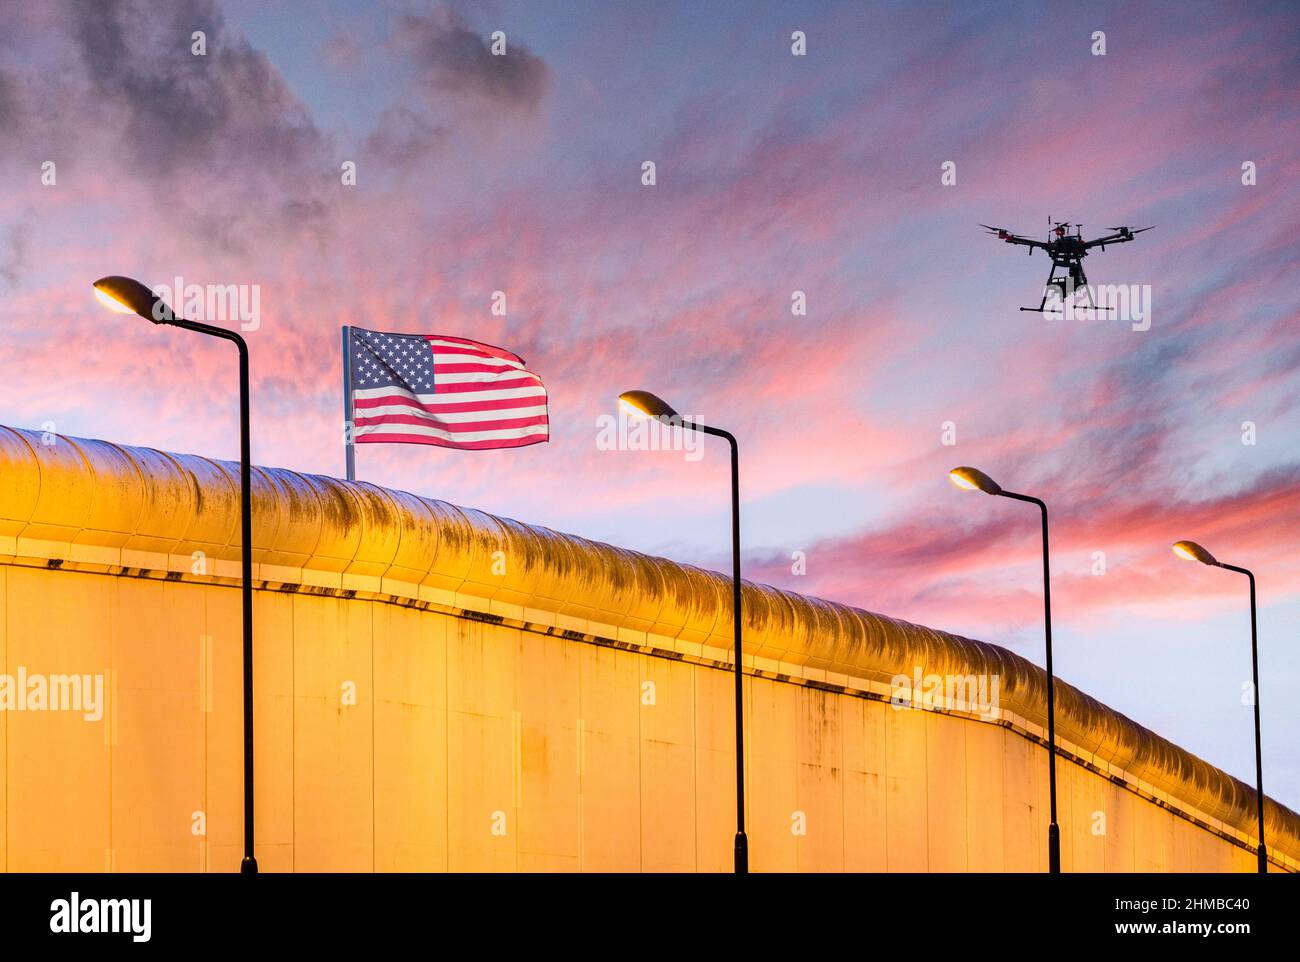 American flag on prison/border wall with drone in sky: immigration, border control, USA prison service... concept Stock Photo